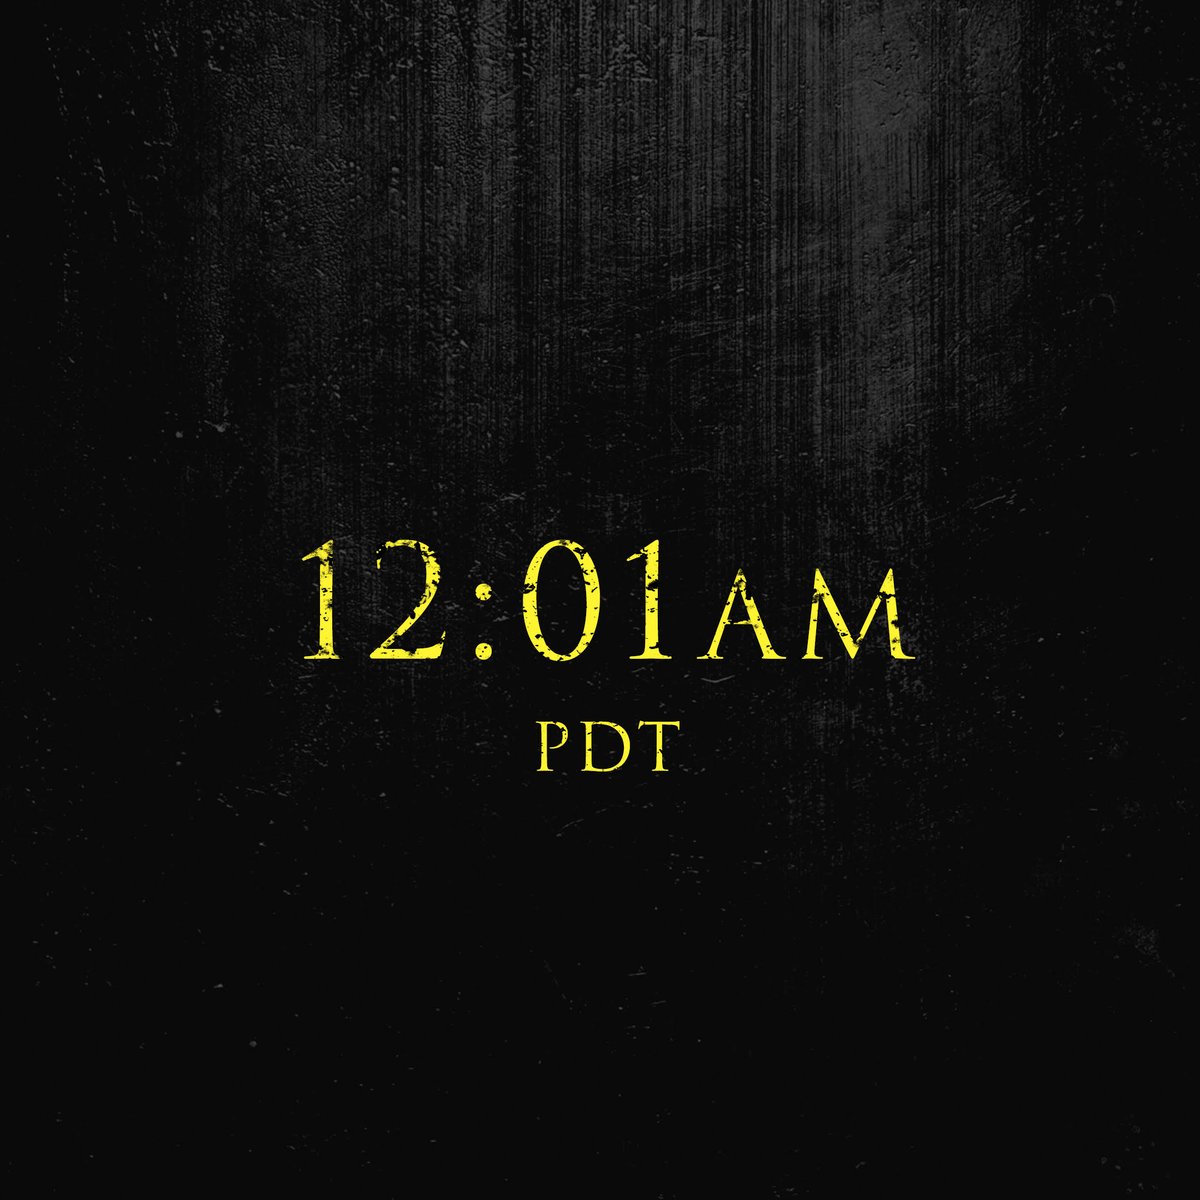 RT @XMenMovies: Tonight, there’s something new to fear. https://t.co/HaxGFpqDdB